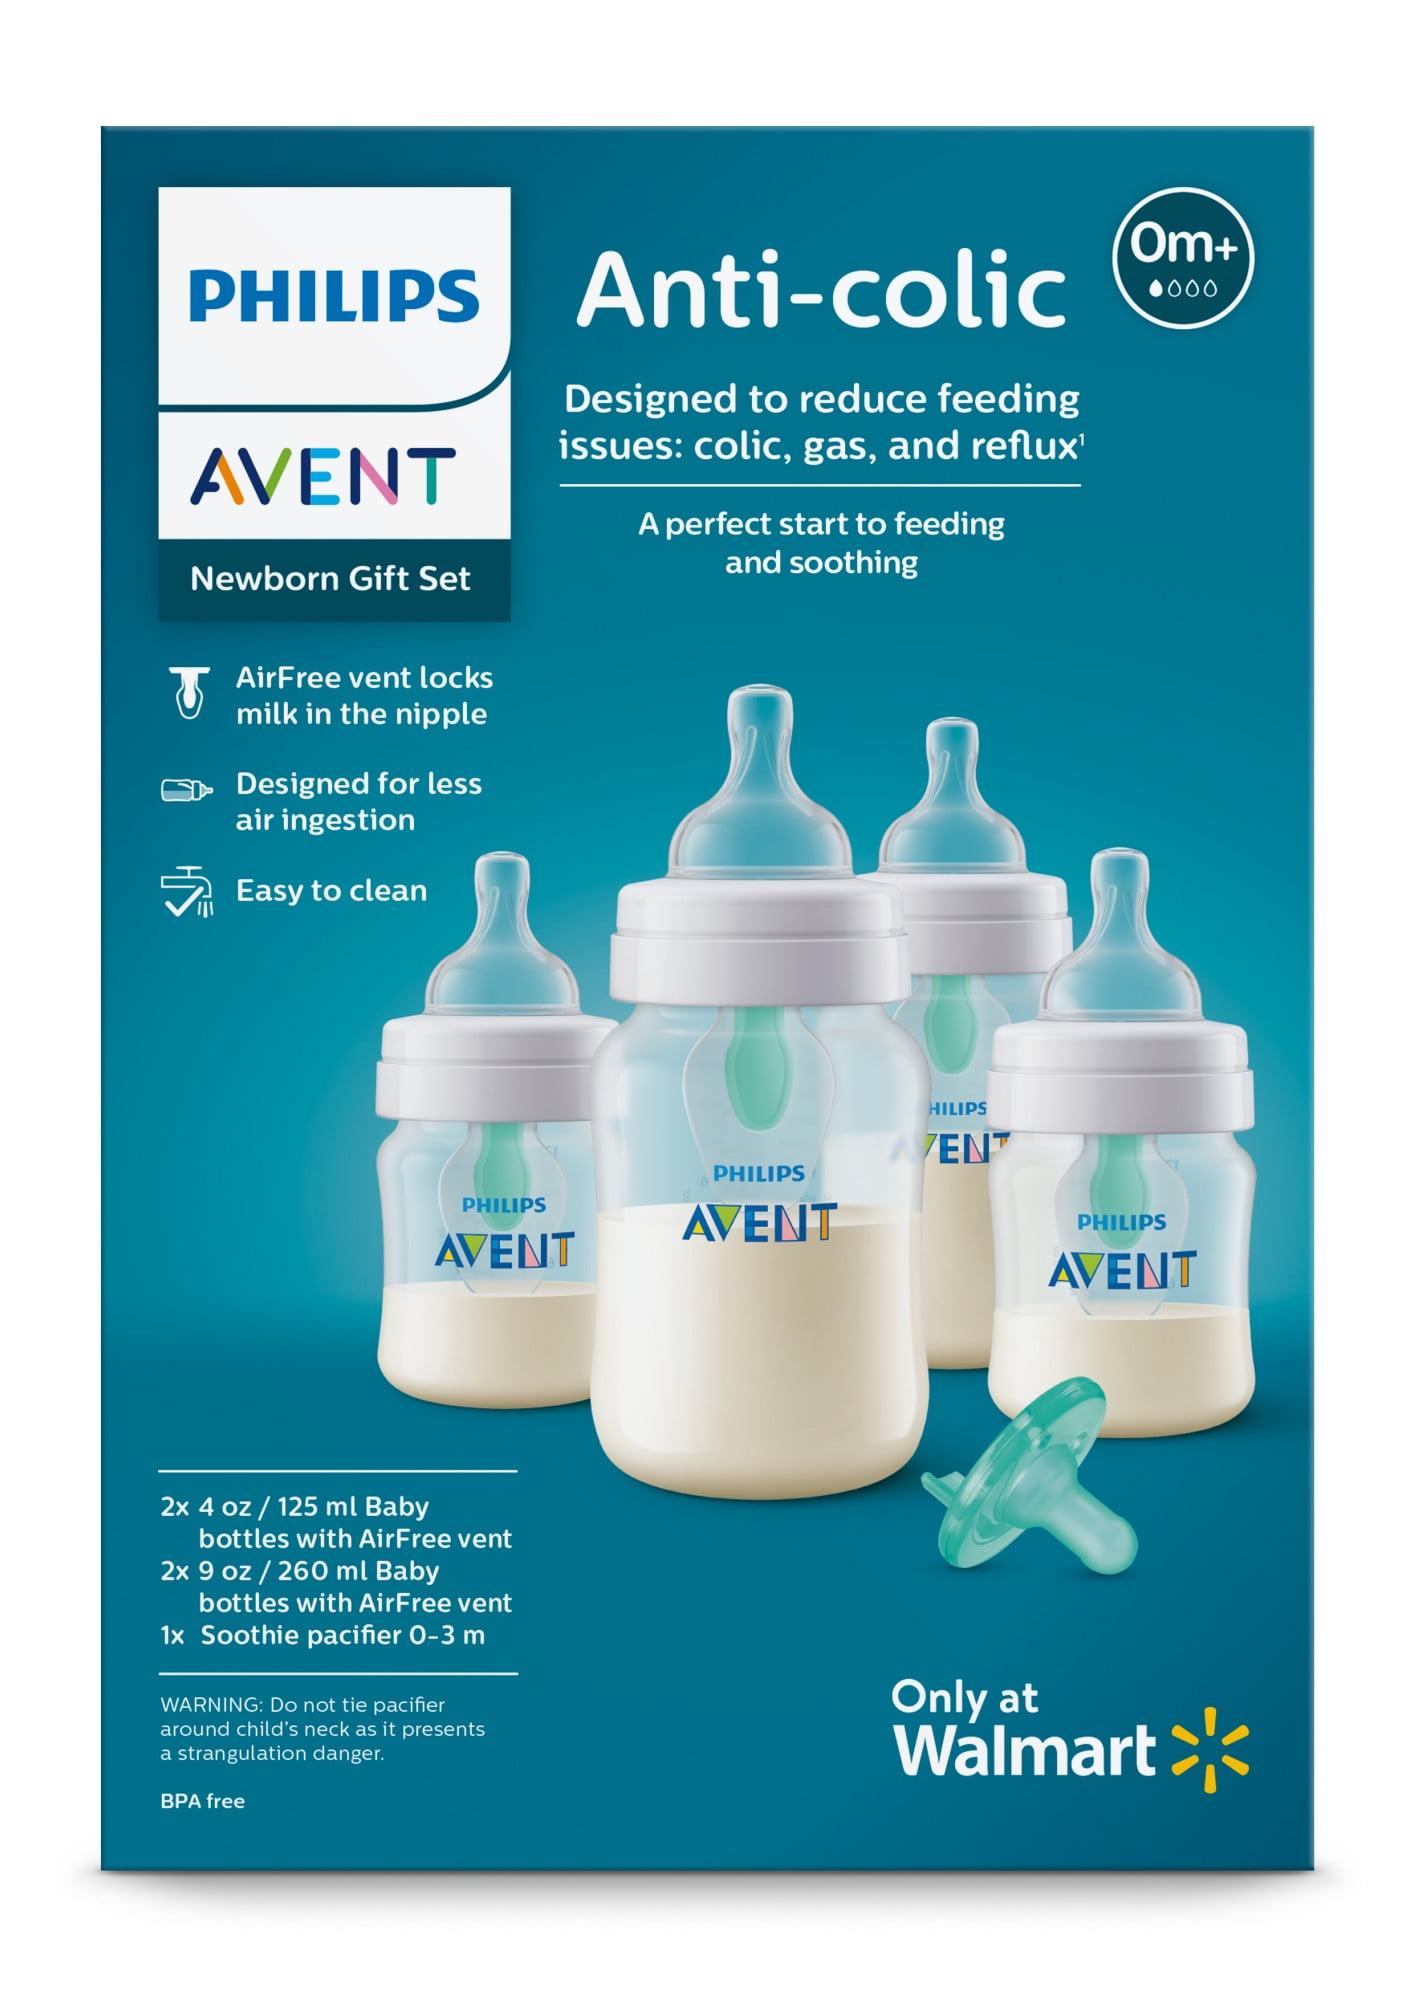 Avent - Anti-Colic Baby Bottle with Airfree Vent All in One Gift Set